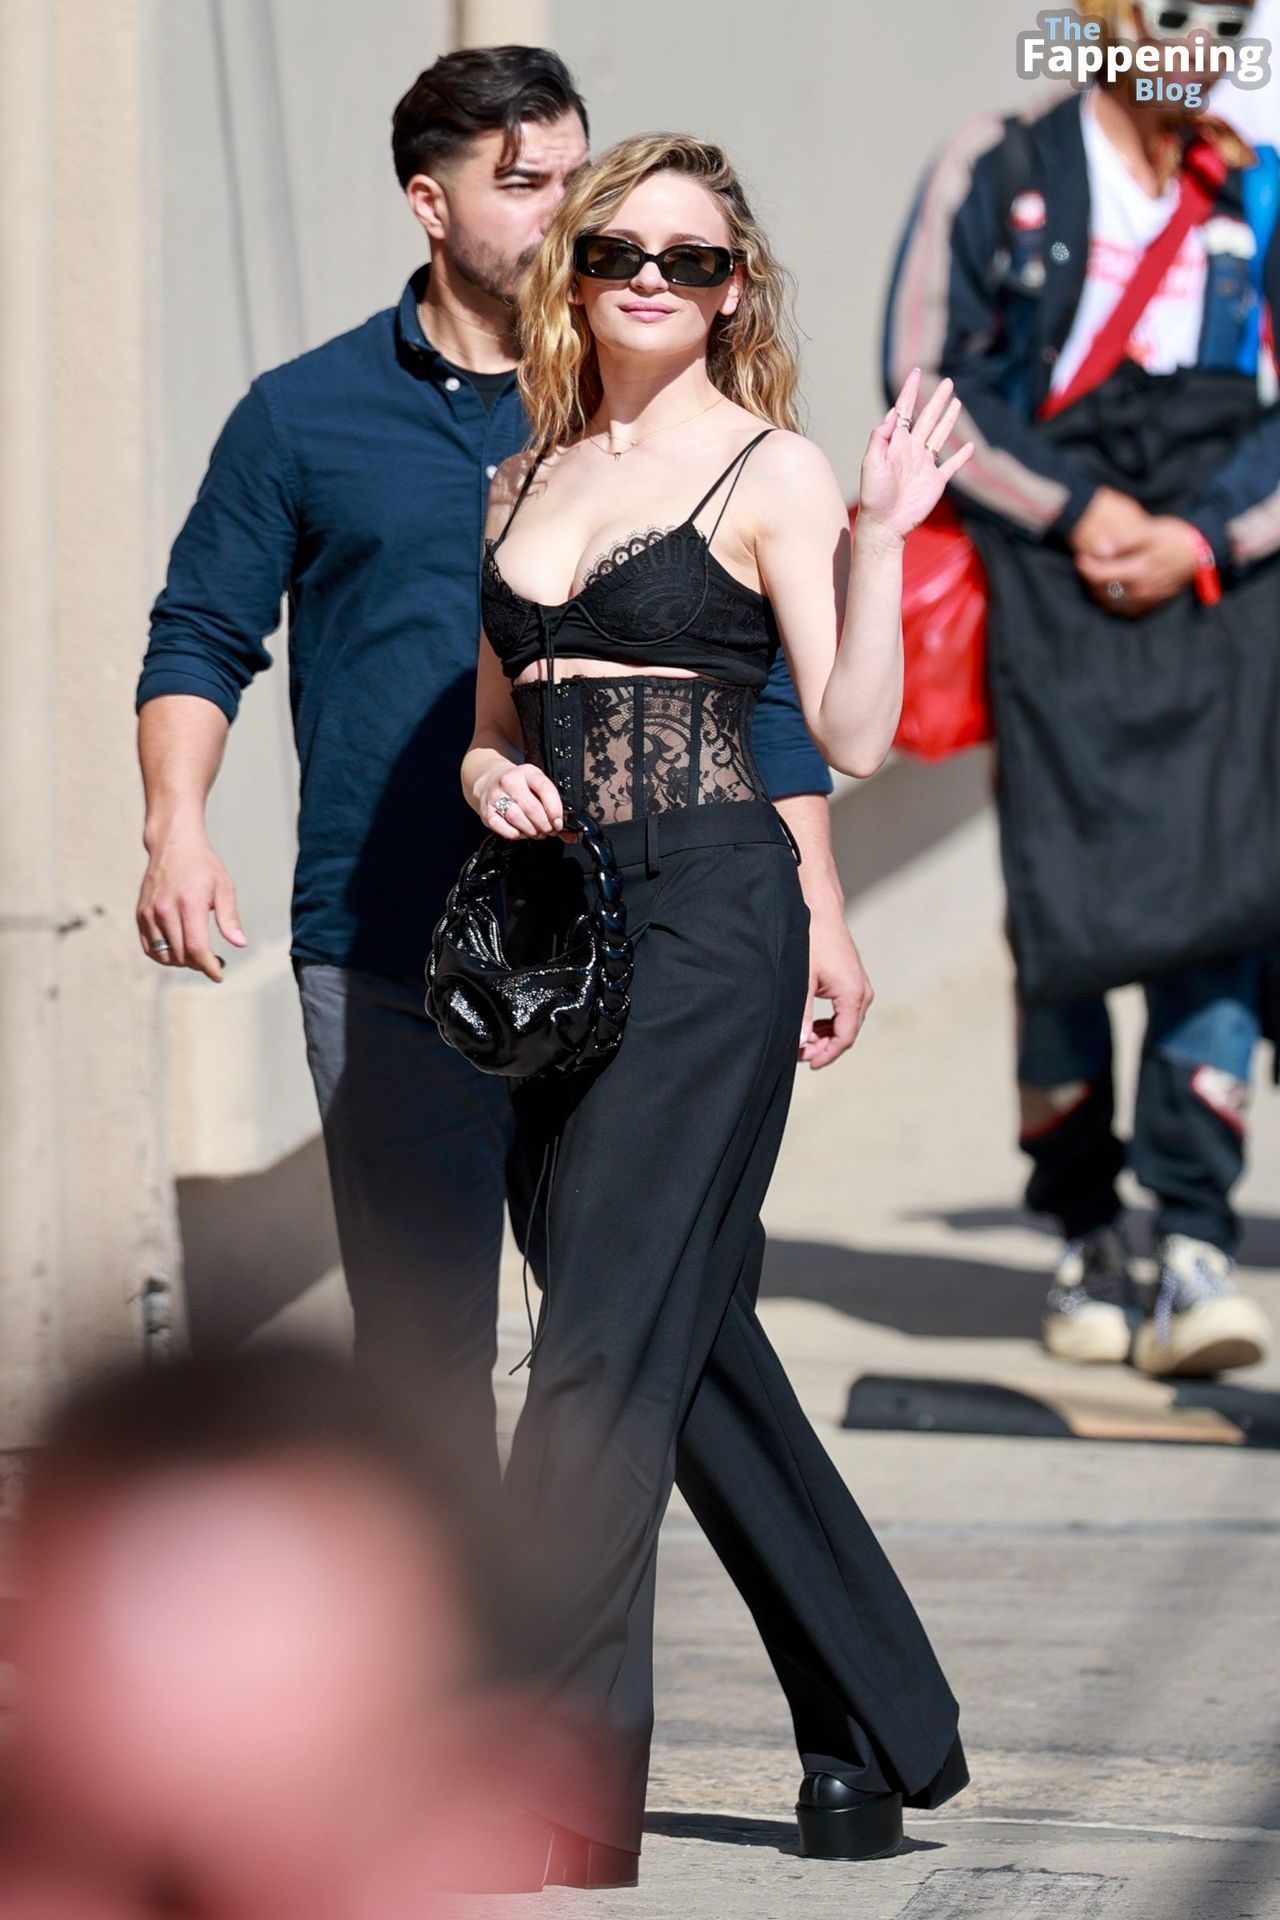 joey-king-boobs-outfit-jimmy-kimmel-live-15-thefappeningblog.com_.jpg